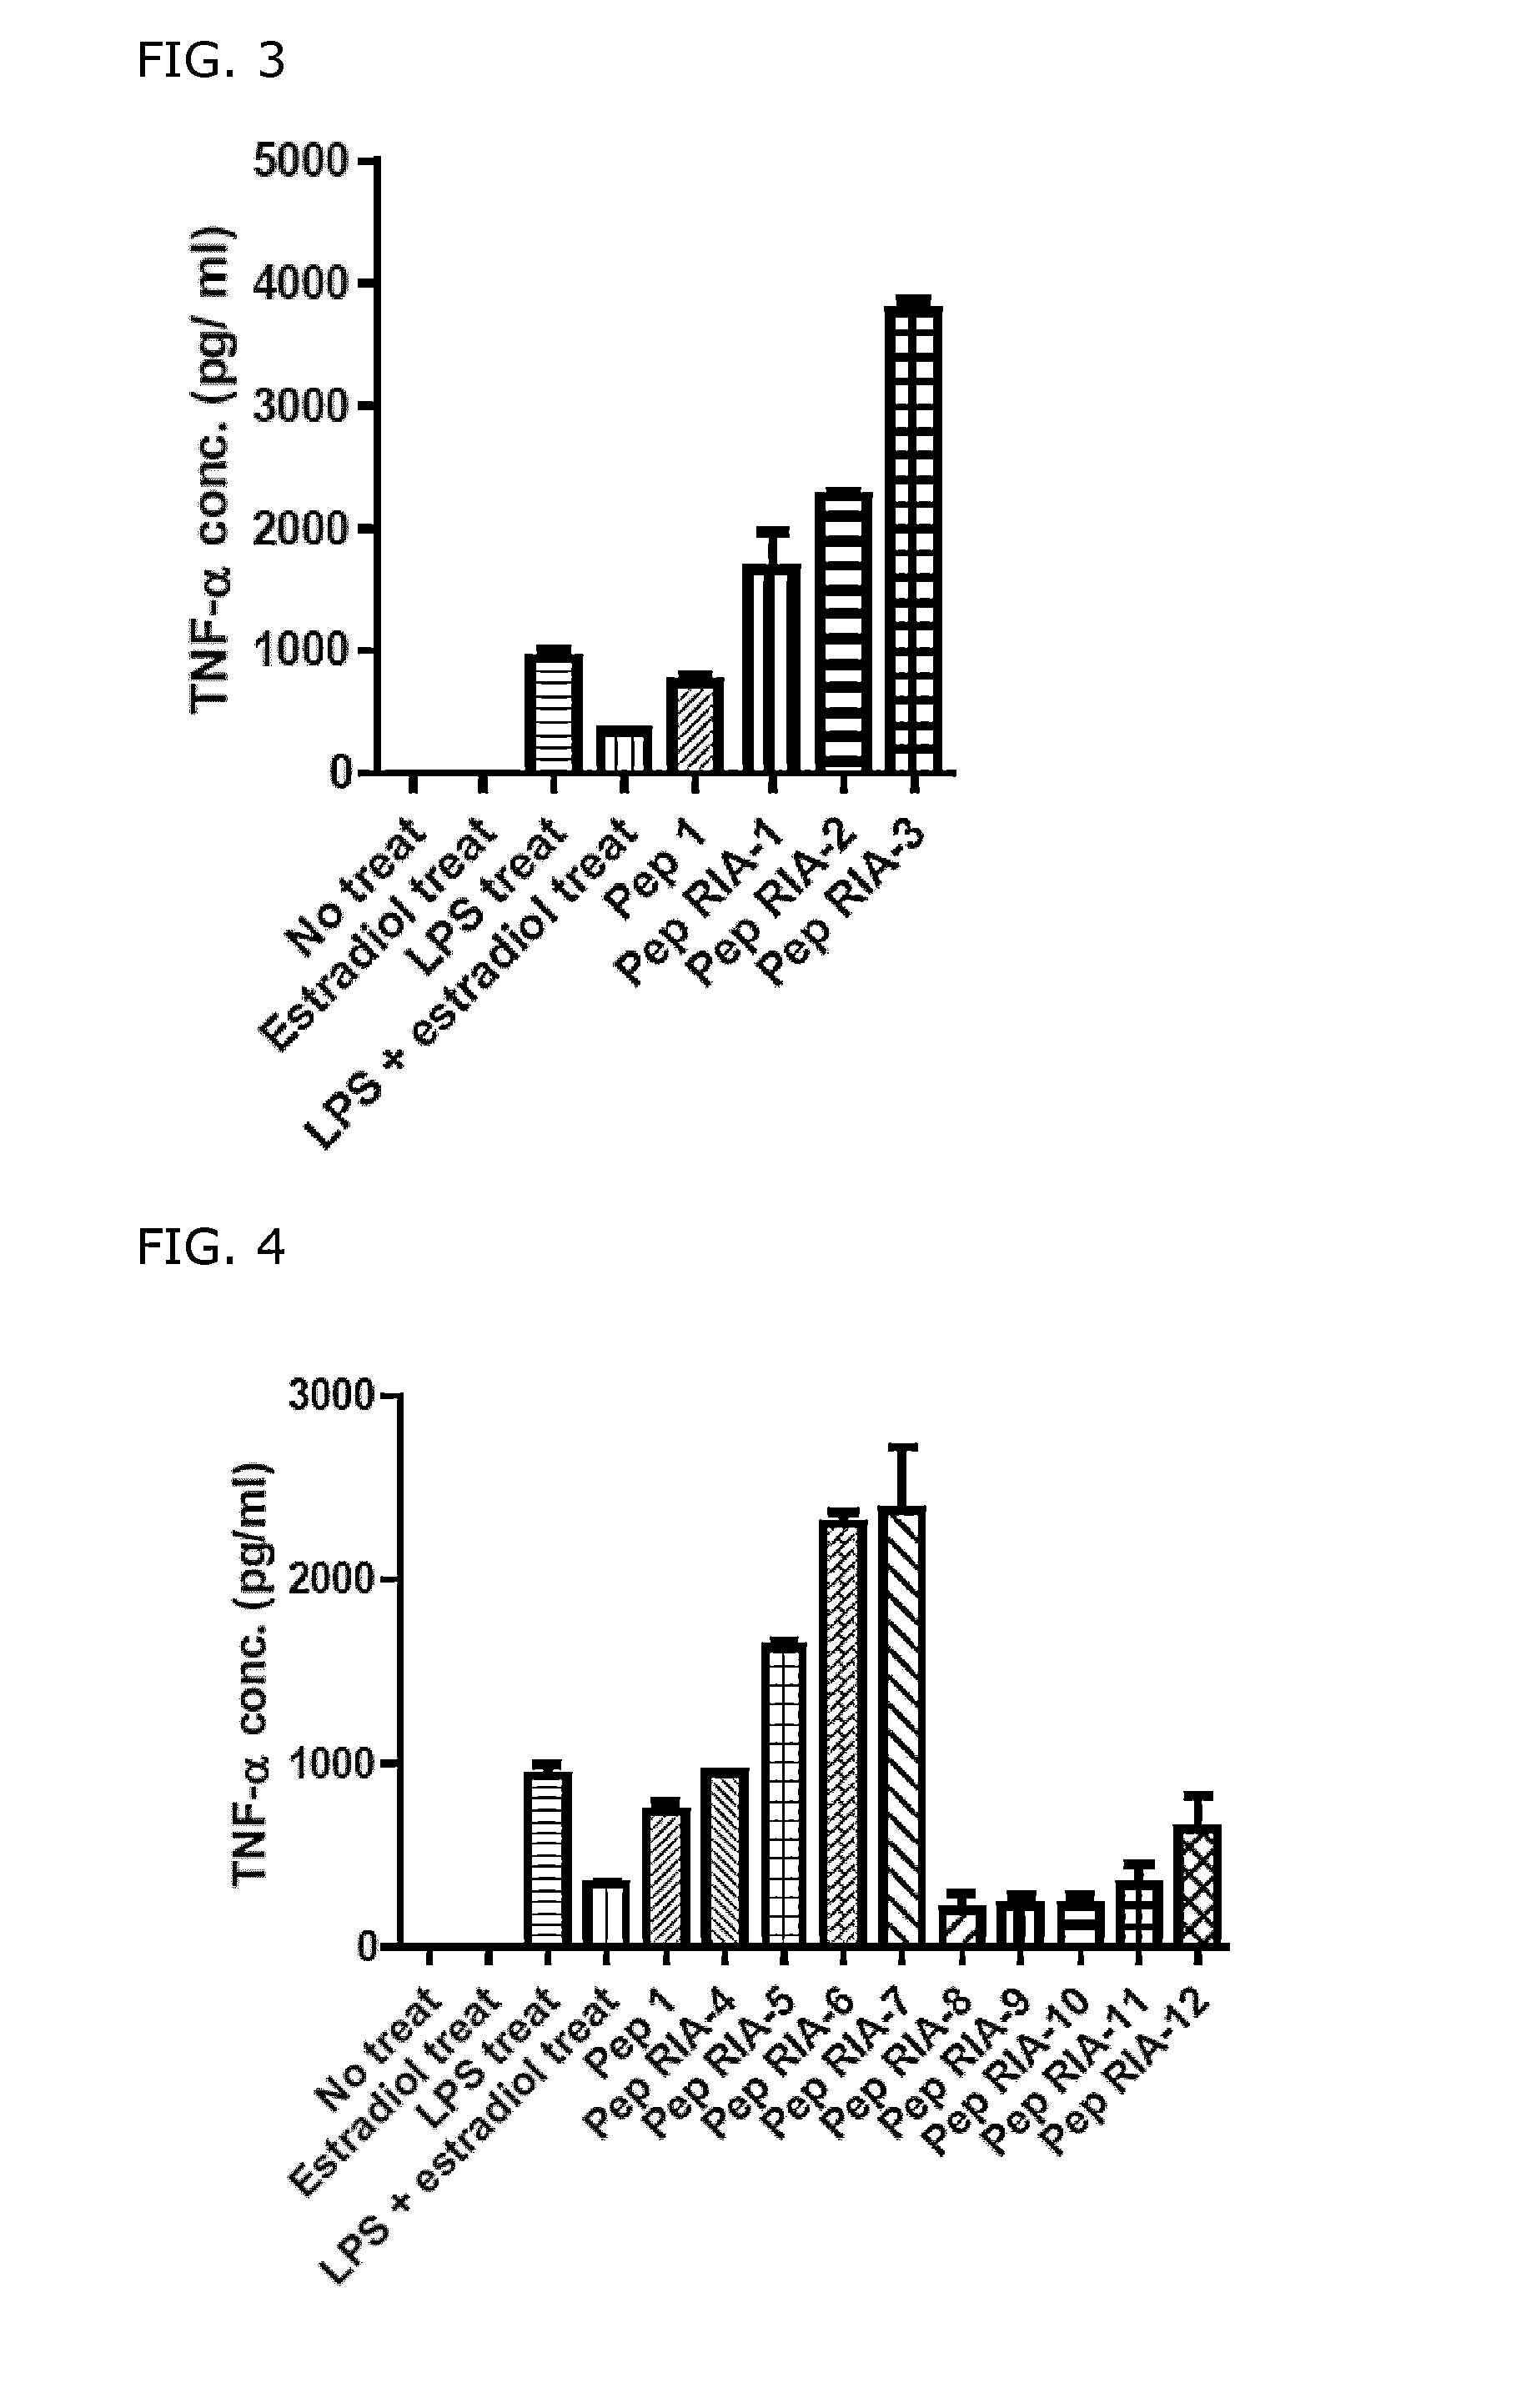 Anti-inflammatory peptides and composition comprising the same